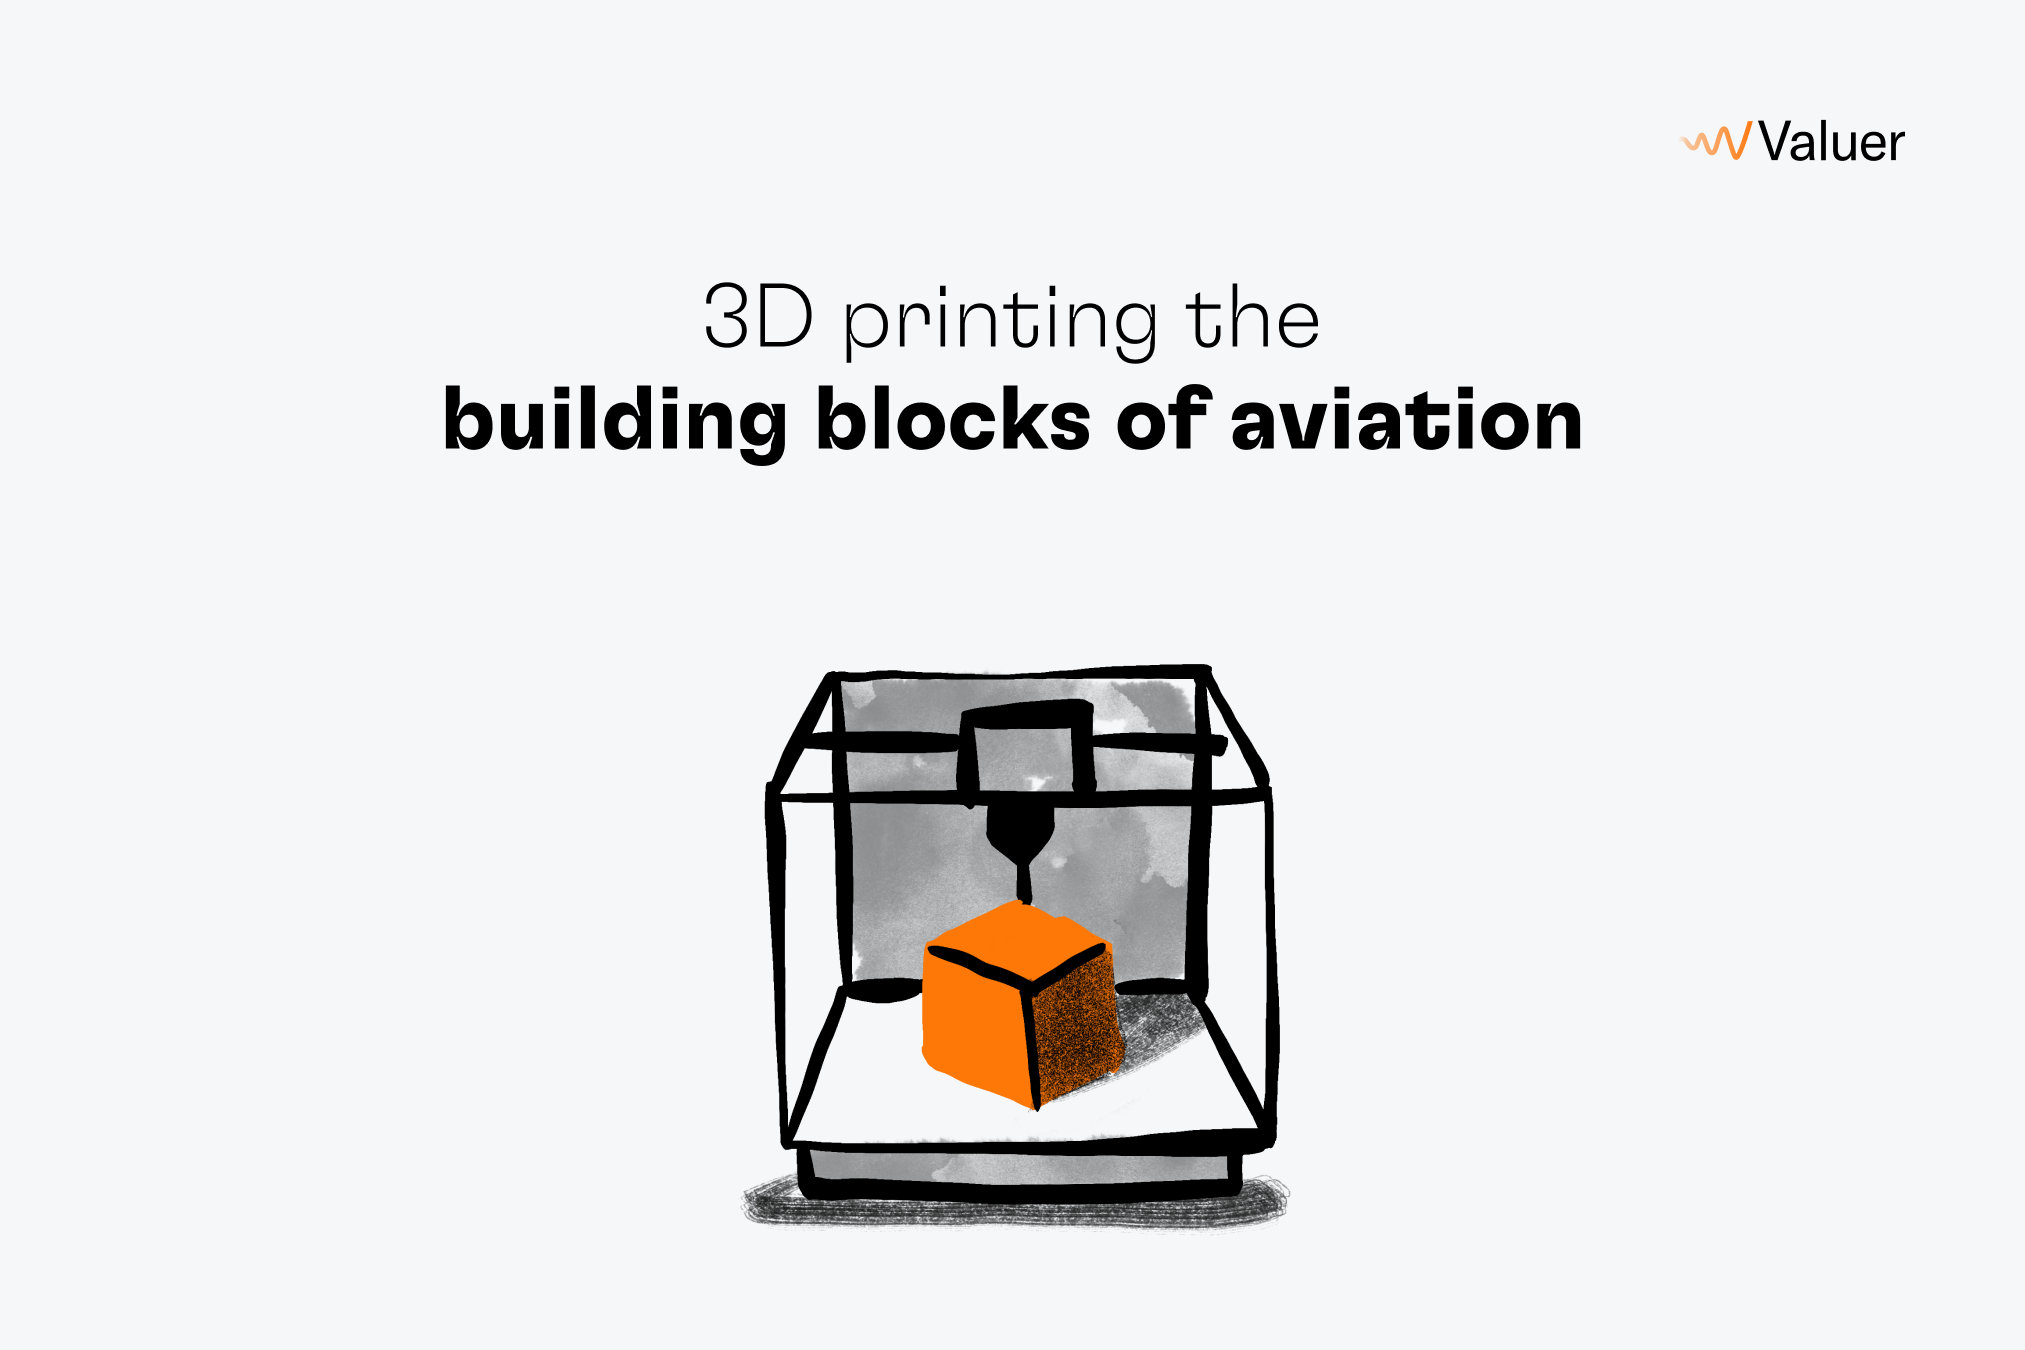 3D printing the building blocks of aviation